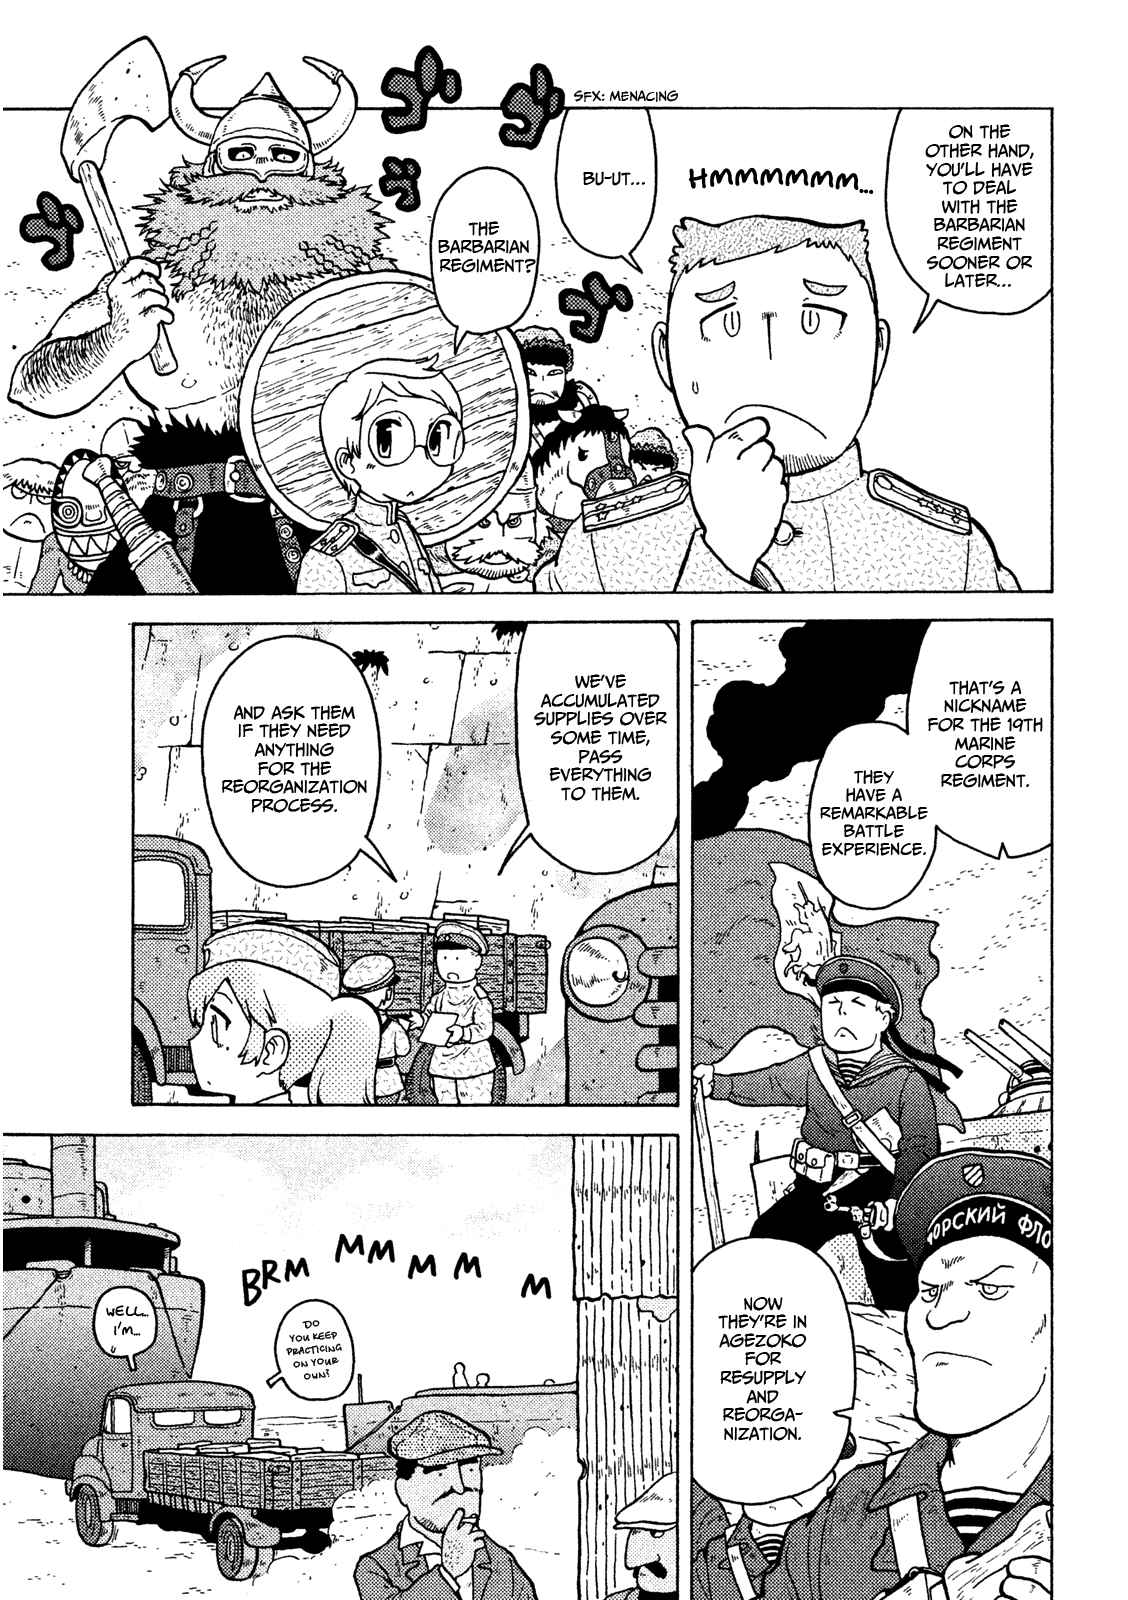 Guns and Stamps Vol. 2 Ch. 9 Agezoko Gives the Cold Shoulder